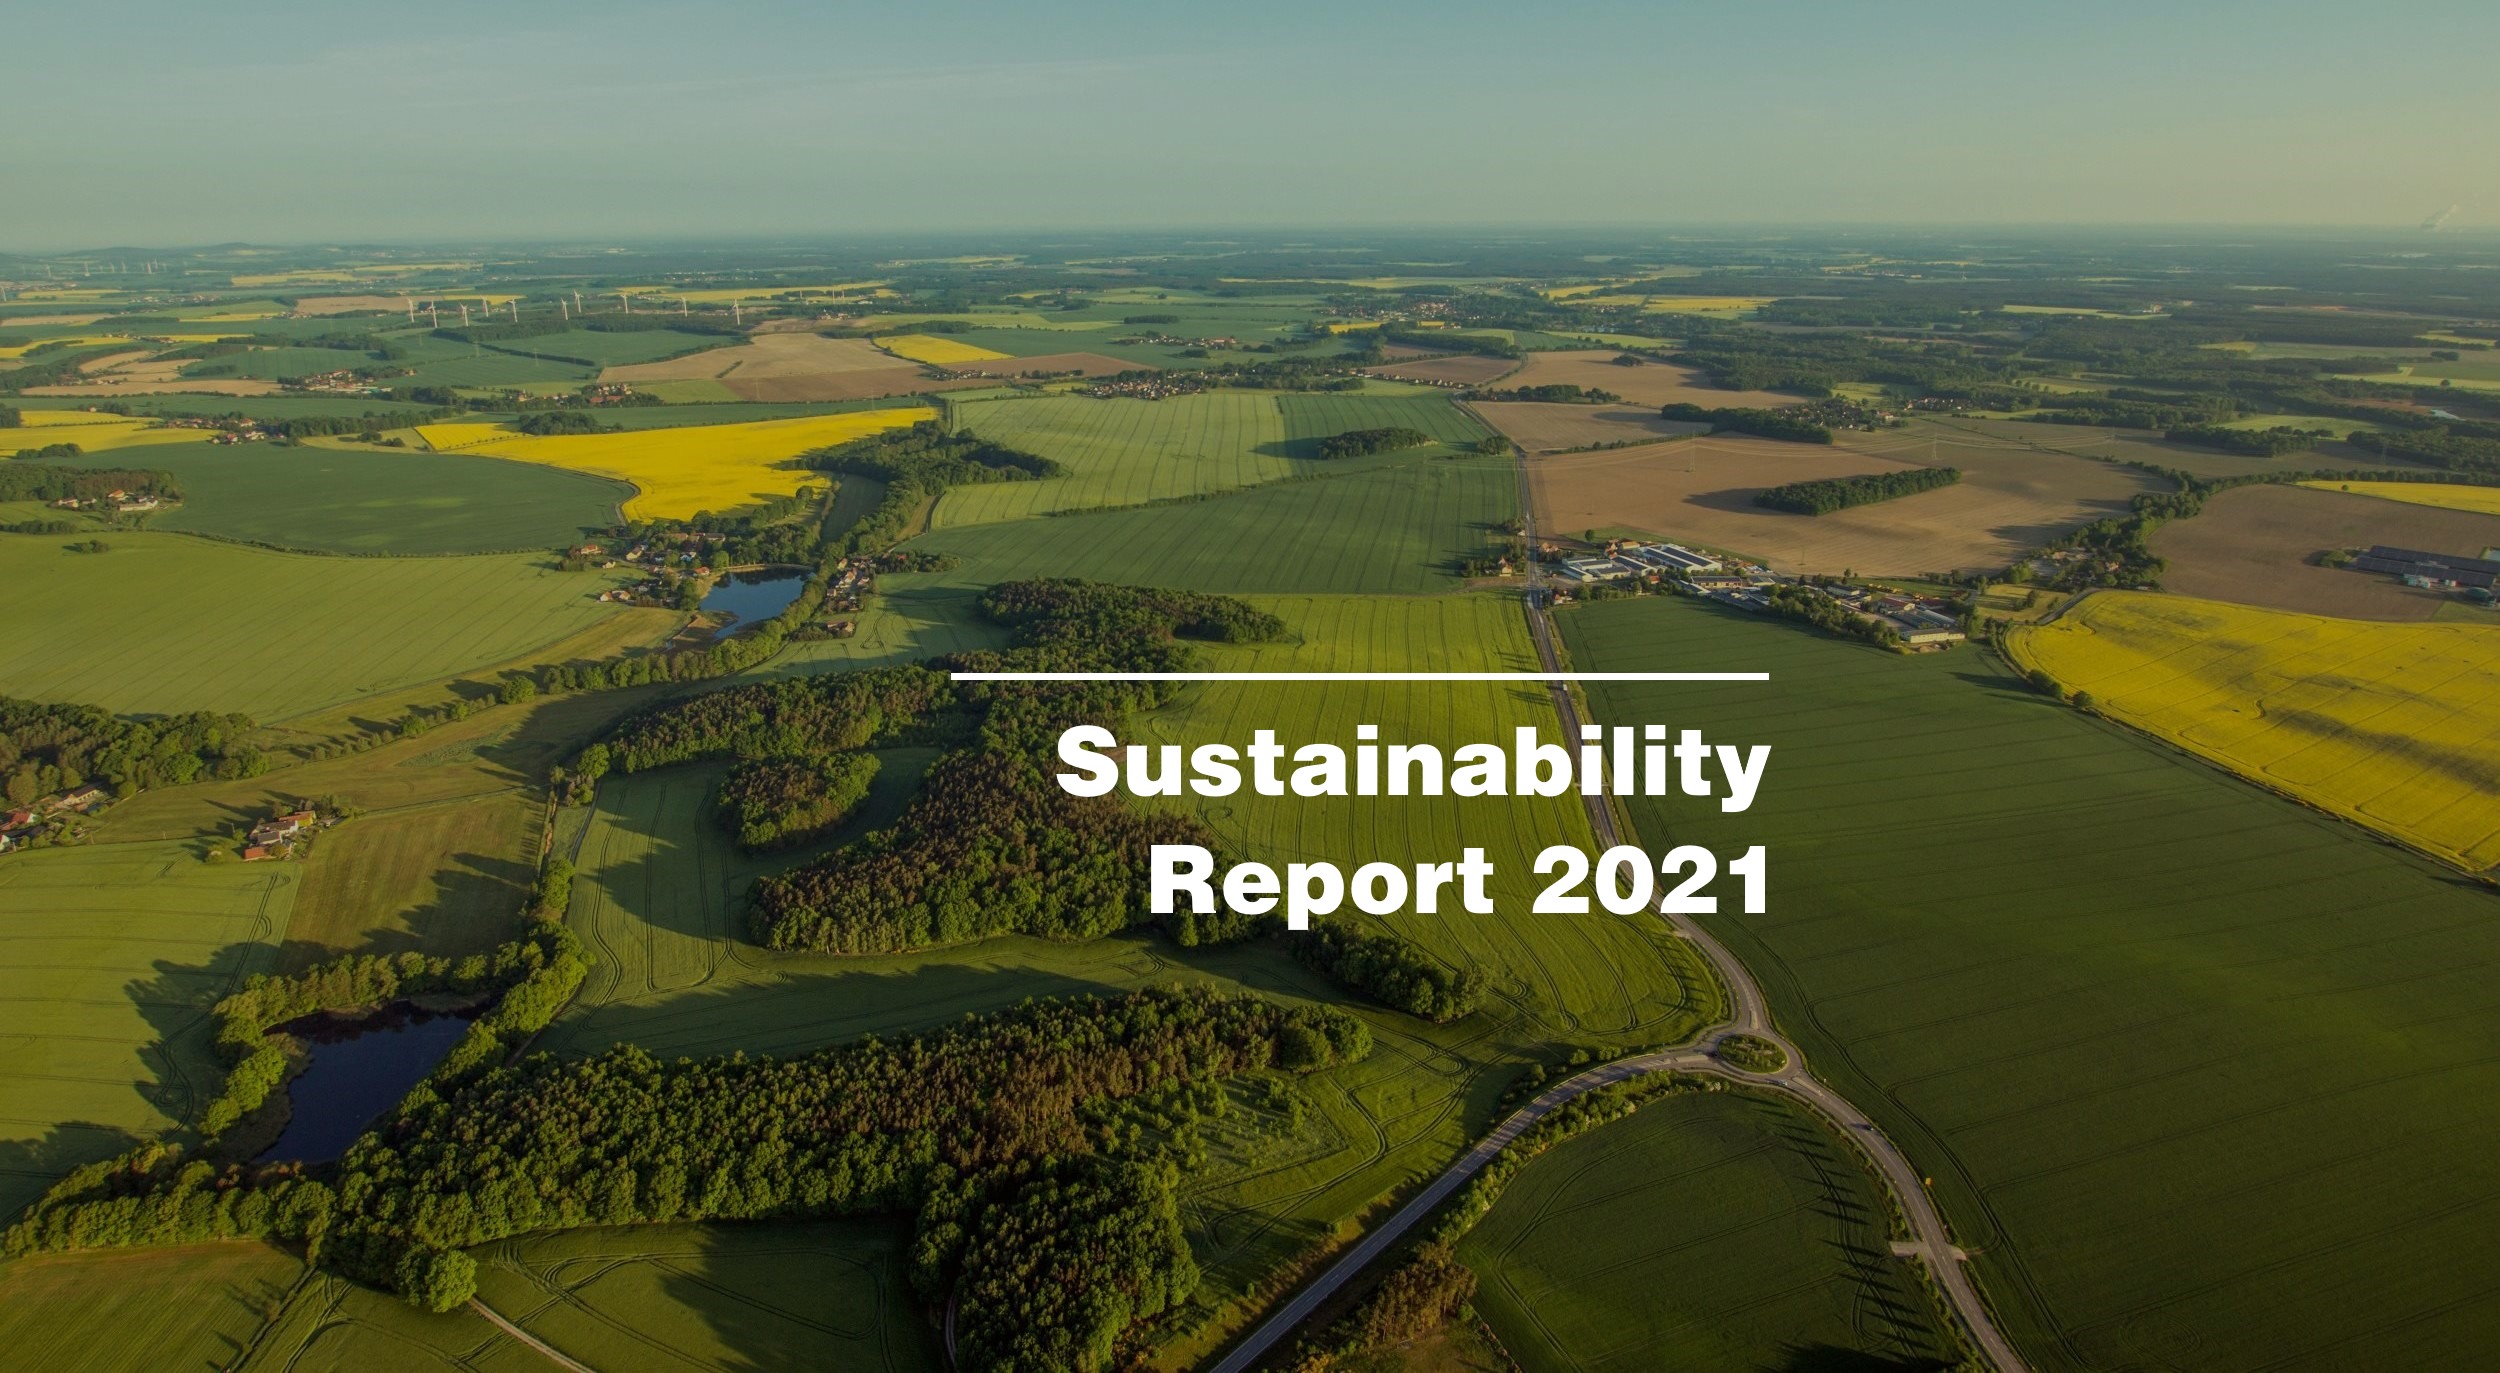 CABB Group presents Sustainability Report for 2021 